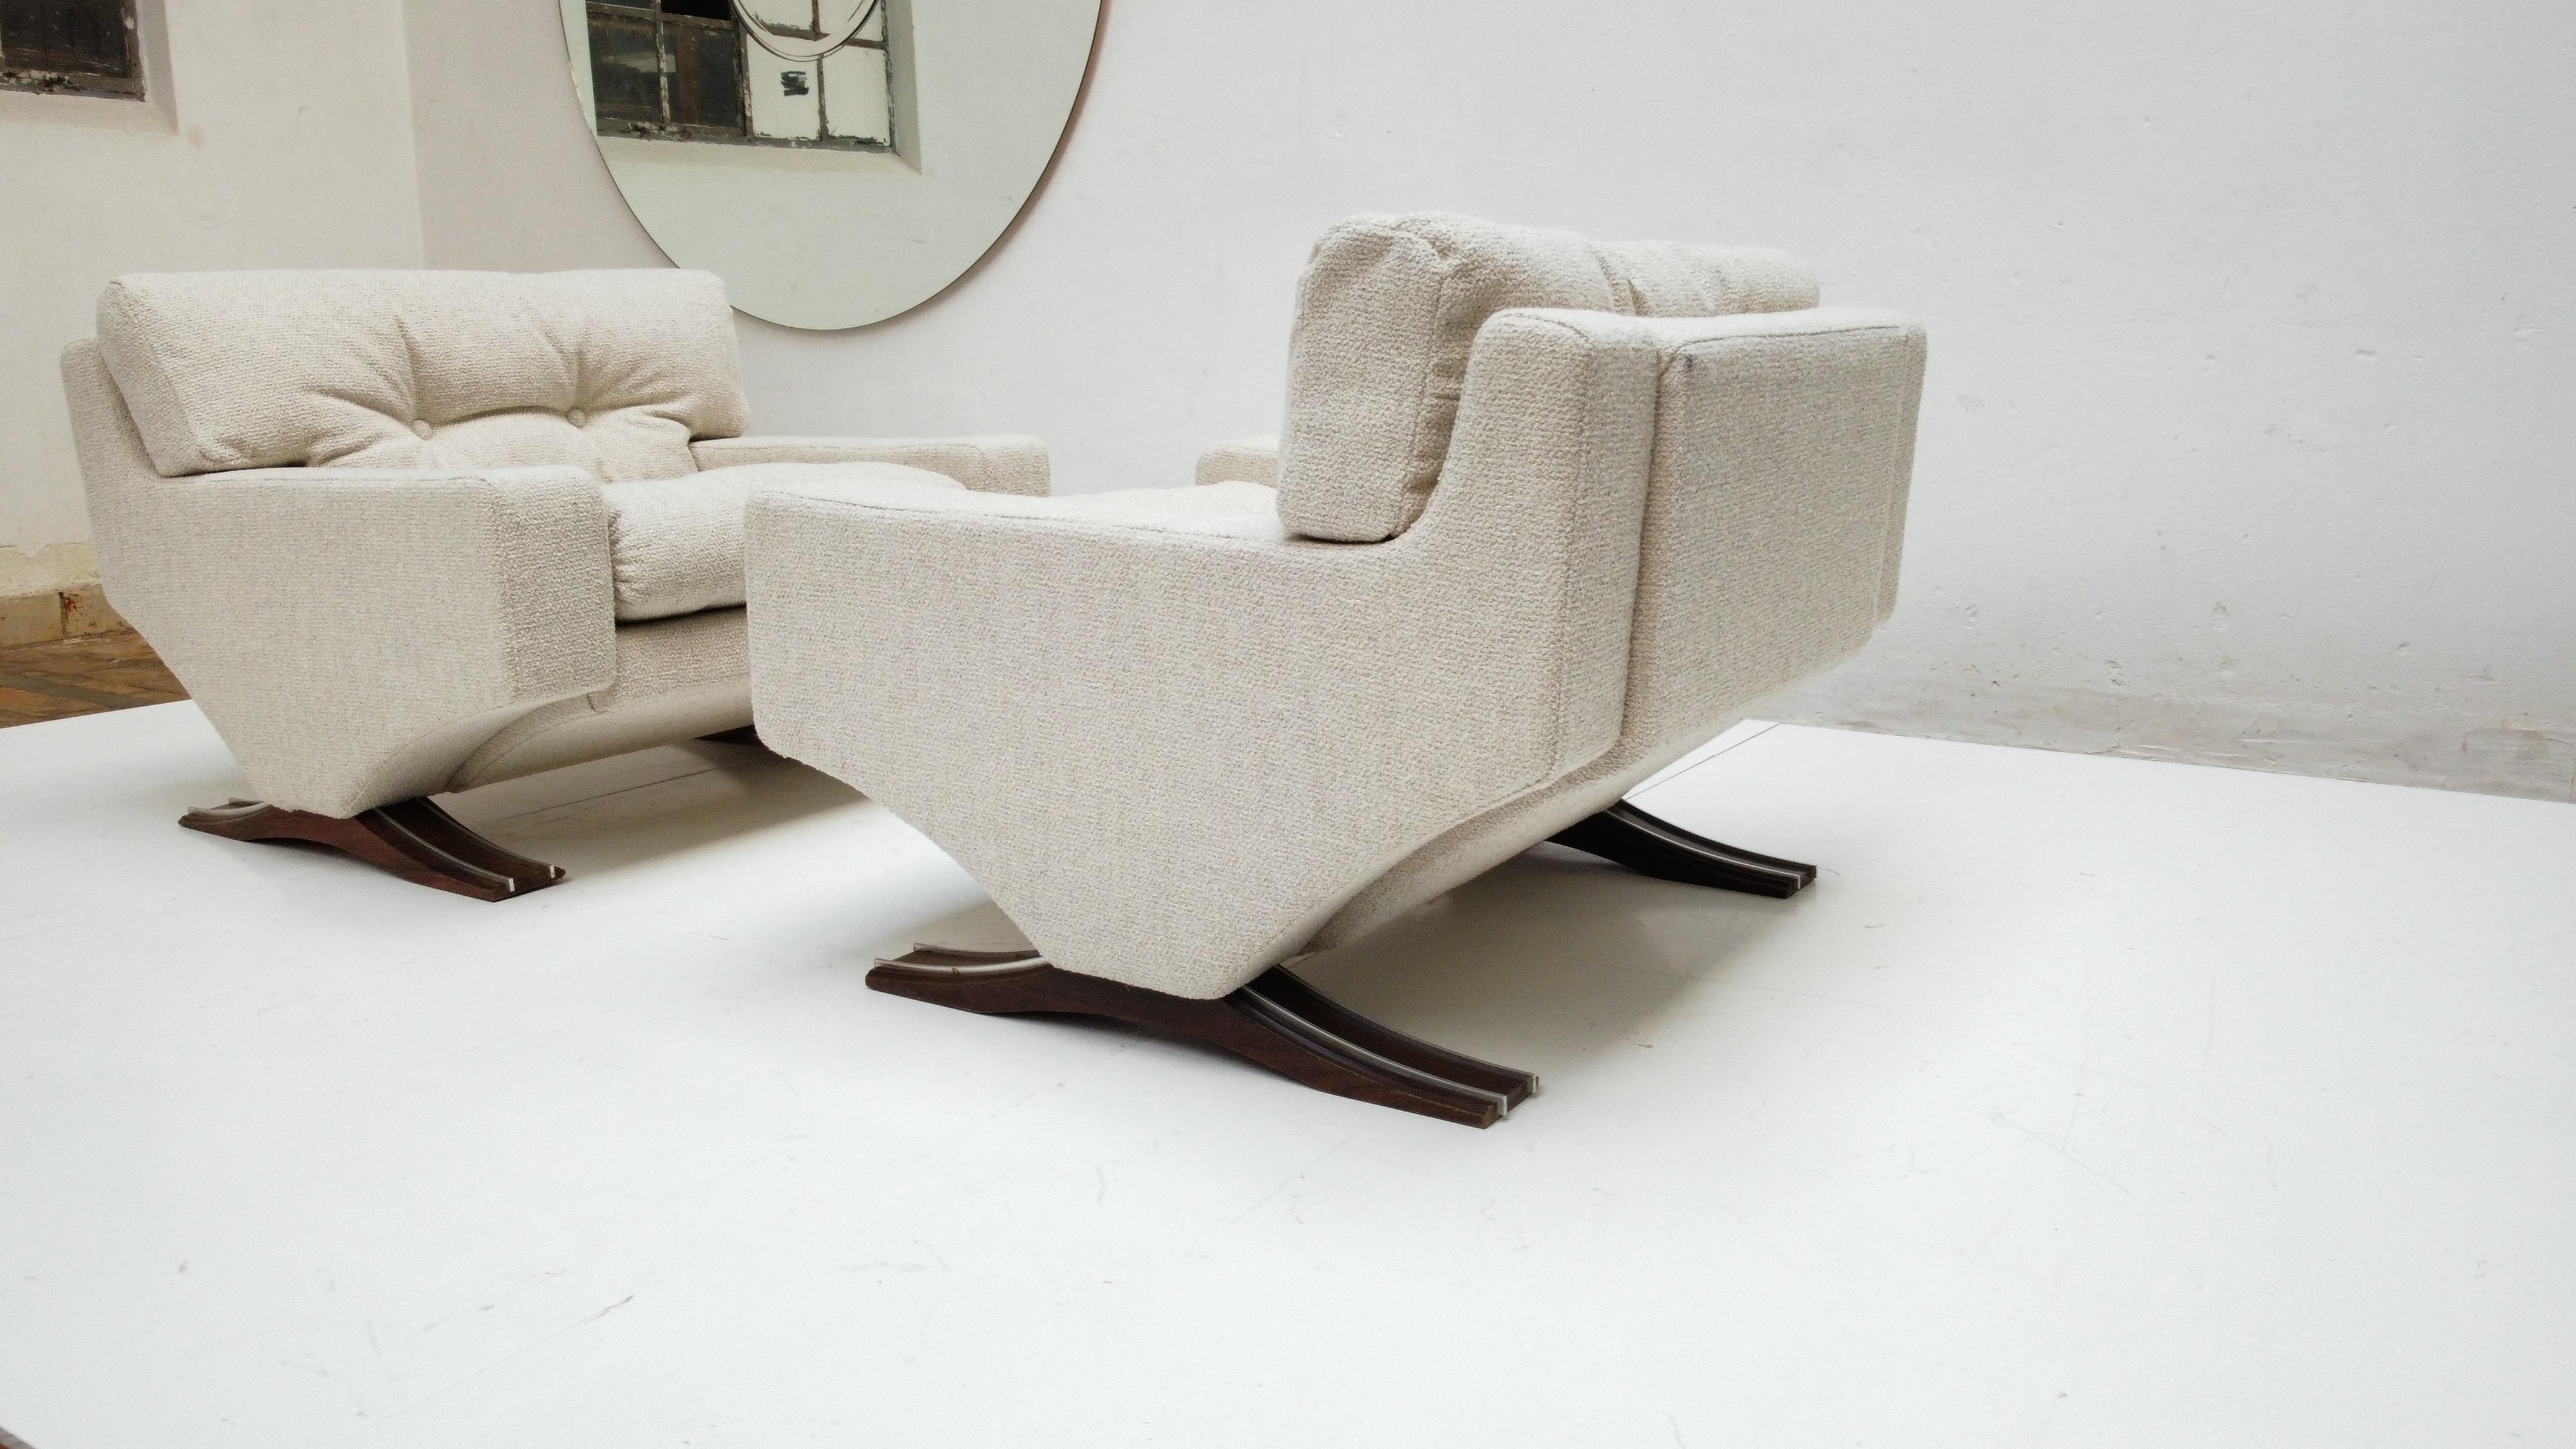 Rare and beautiful pair of monumental 'Magister' lounge chairs, designed in 1966 by Italian sculptor and artist Franz T Sartori for 'Flexform', Milan Italy.

This rare and exquisite design was first exhibited at the 7th 'salon di mobile' in Milan